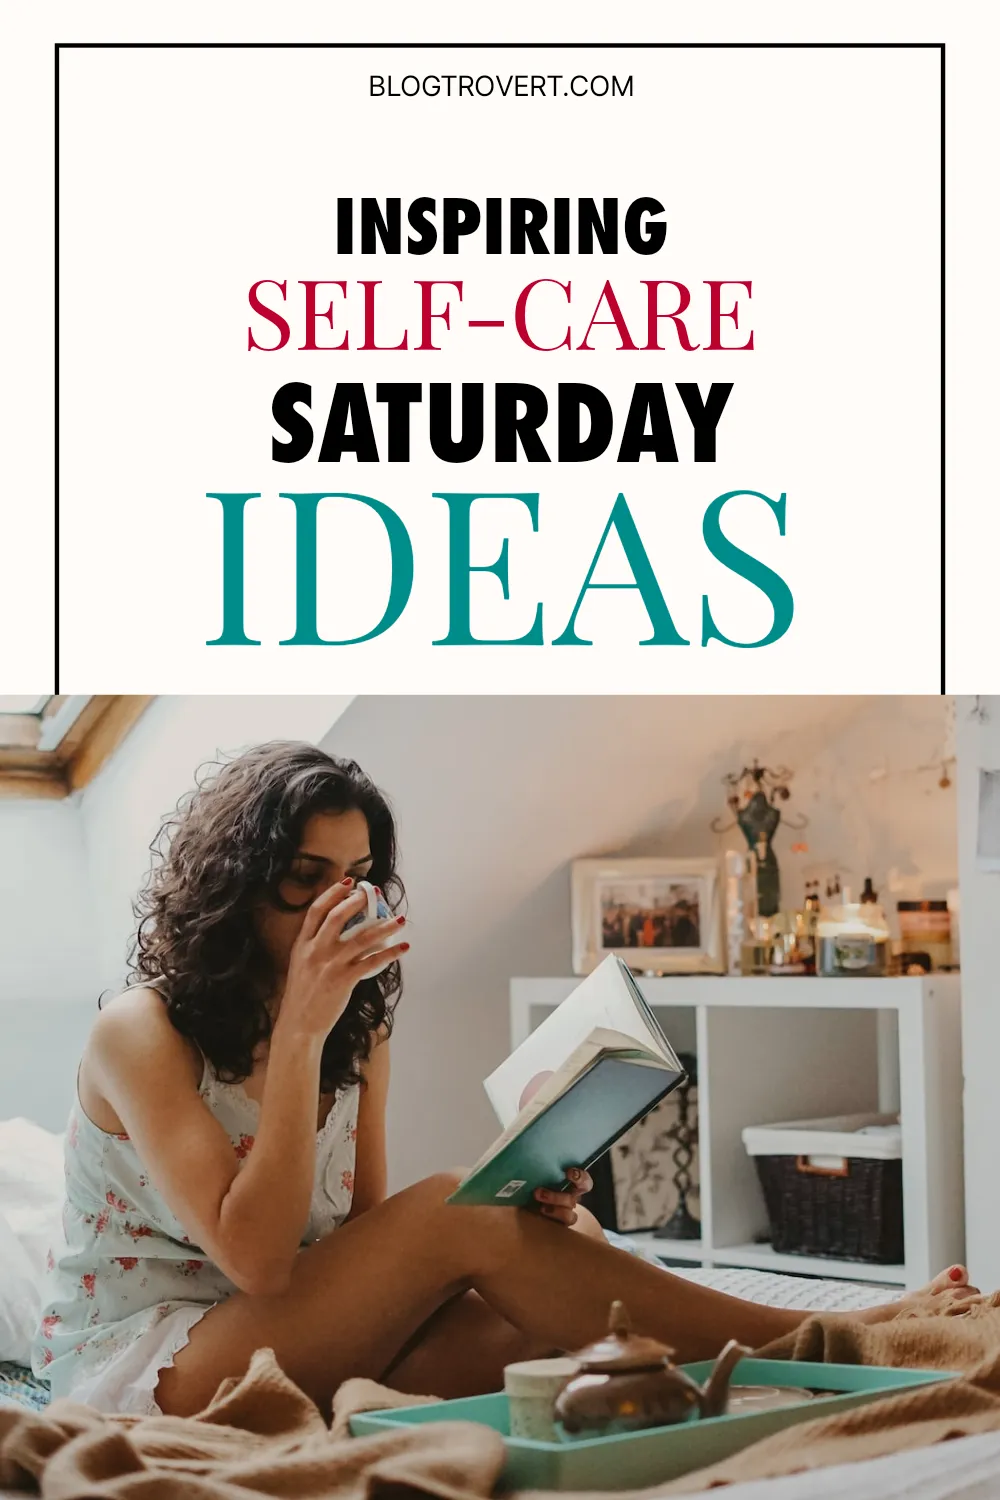 50+ amazing self-care Saturday ideas to try this weekend 5